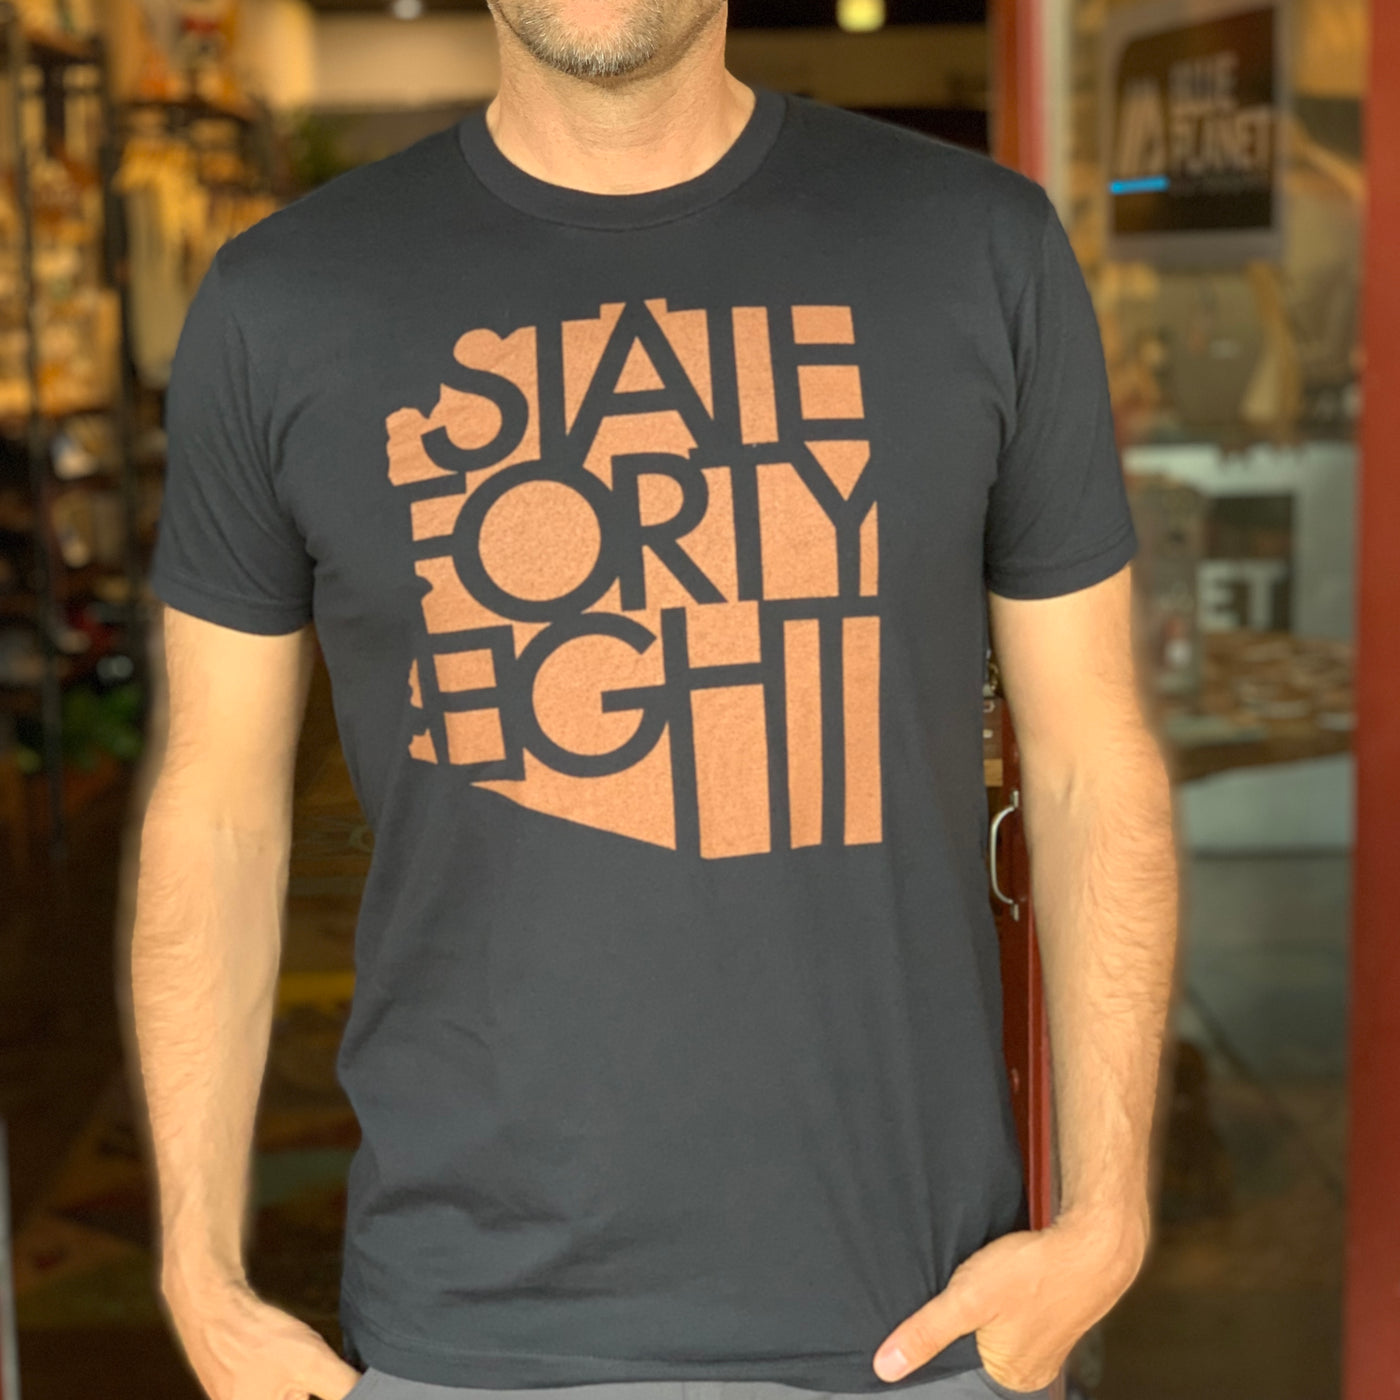 State Forty Eight Tee - Copper/Black